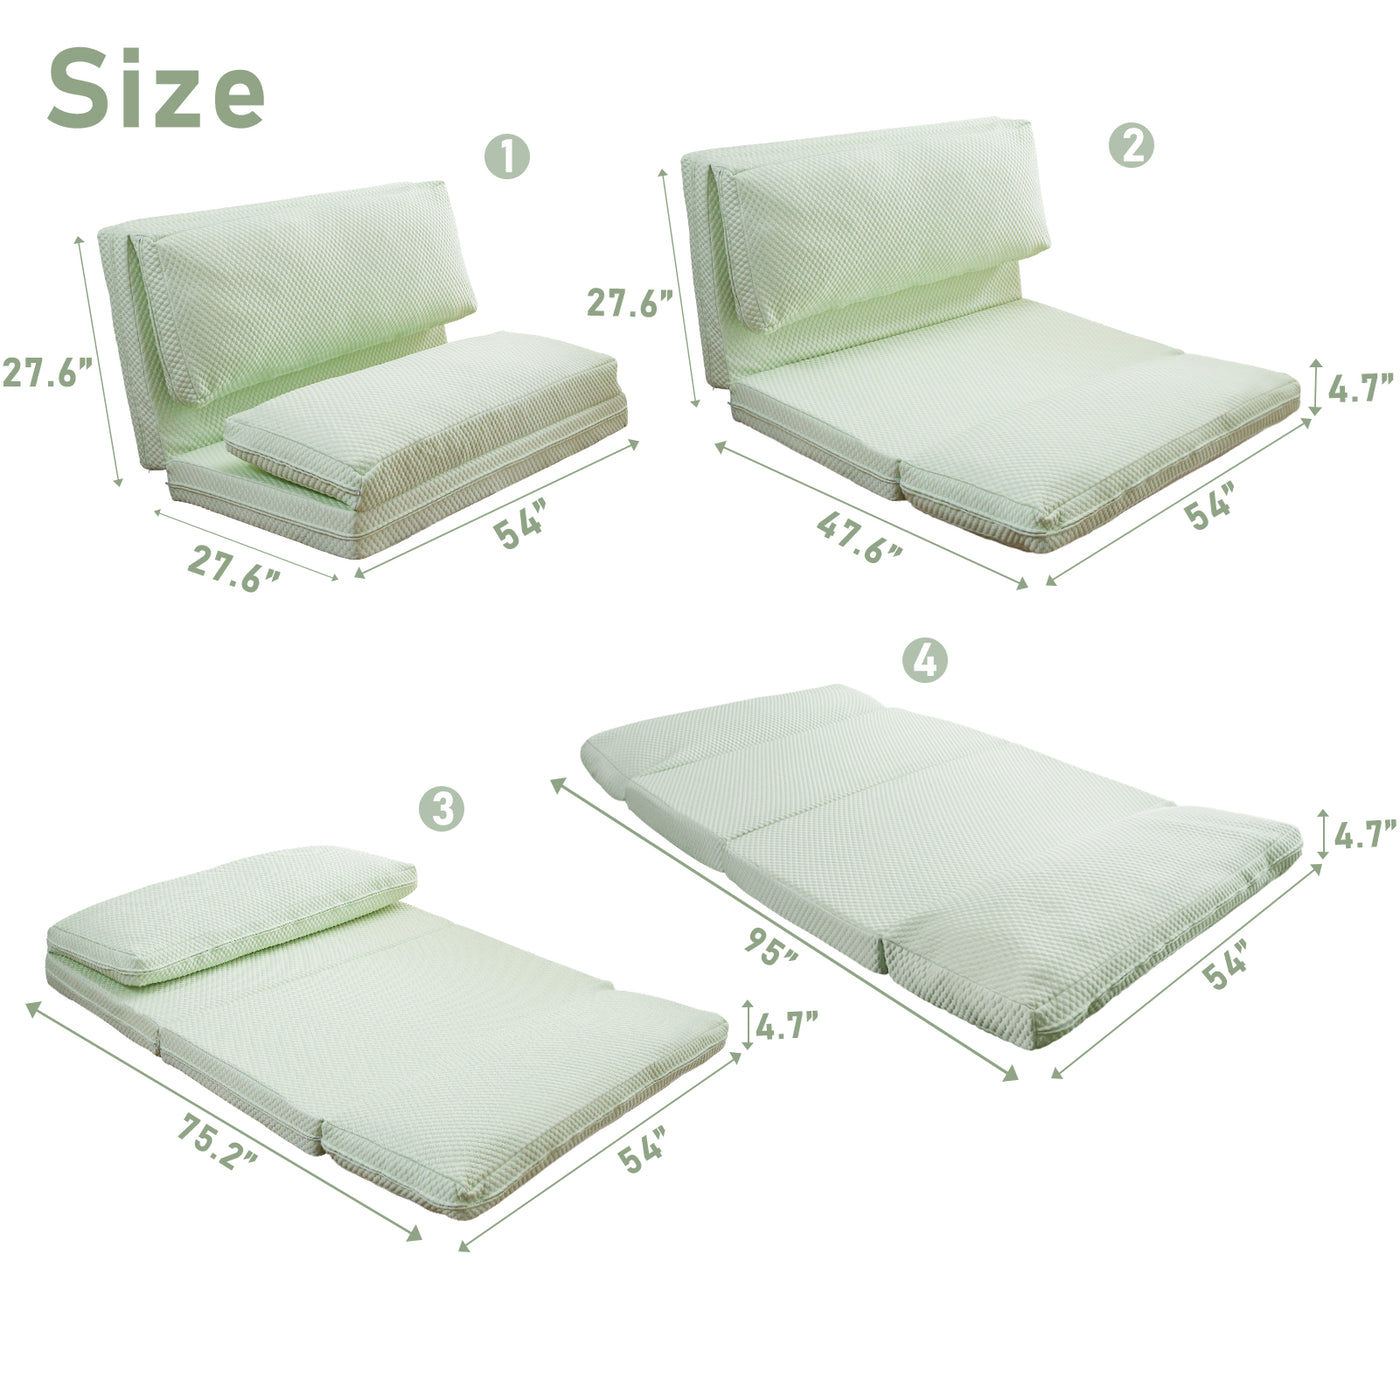 MAXYOYO Cooling Bean Bag Folding Sofa Bed, Floor Mattress for Hot Sleepers with Cooling Washable Cover, Green